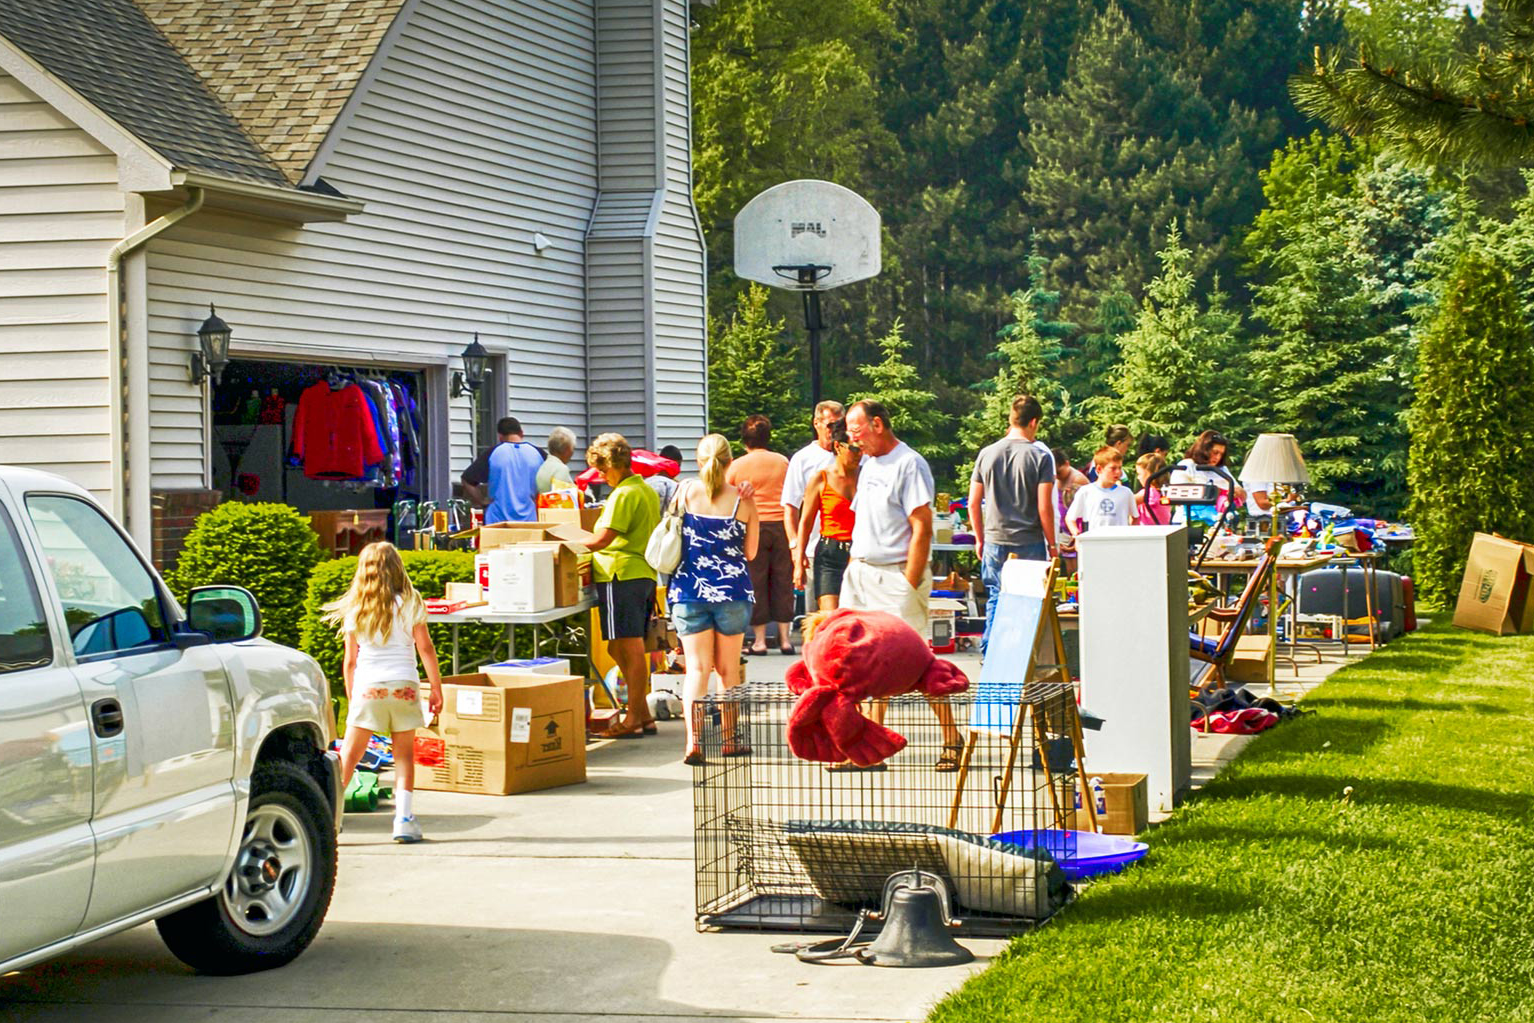 Christmas Shopping at Yard Sale: A Guide to Buy Inexpensive Christmas Gifts